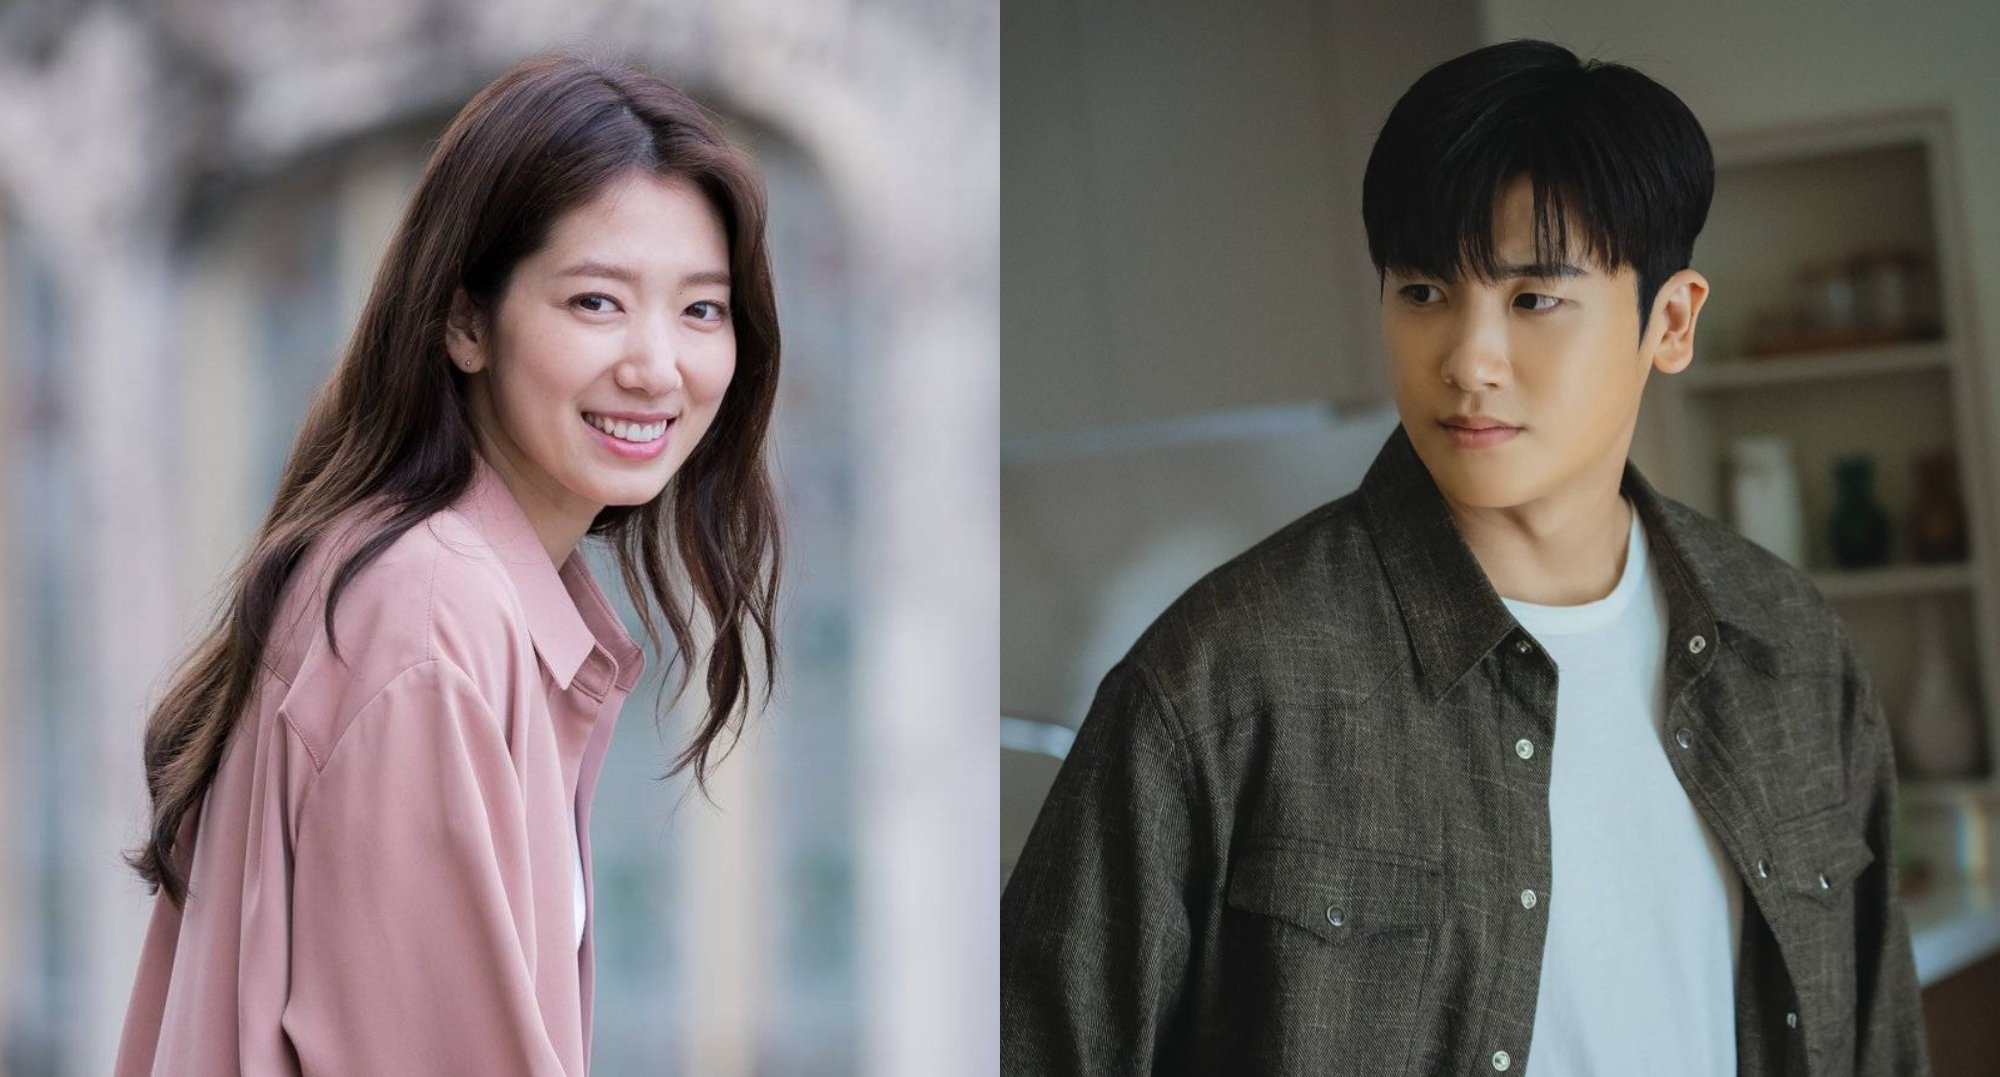 Park Shin-hye and Park Hyung-sik in talks to star in 'Doctor Slump.'